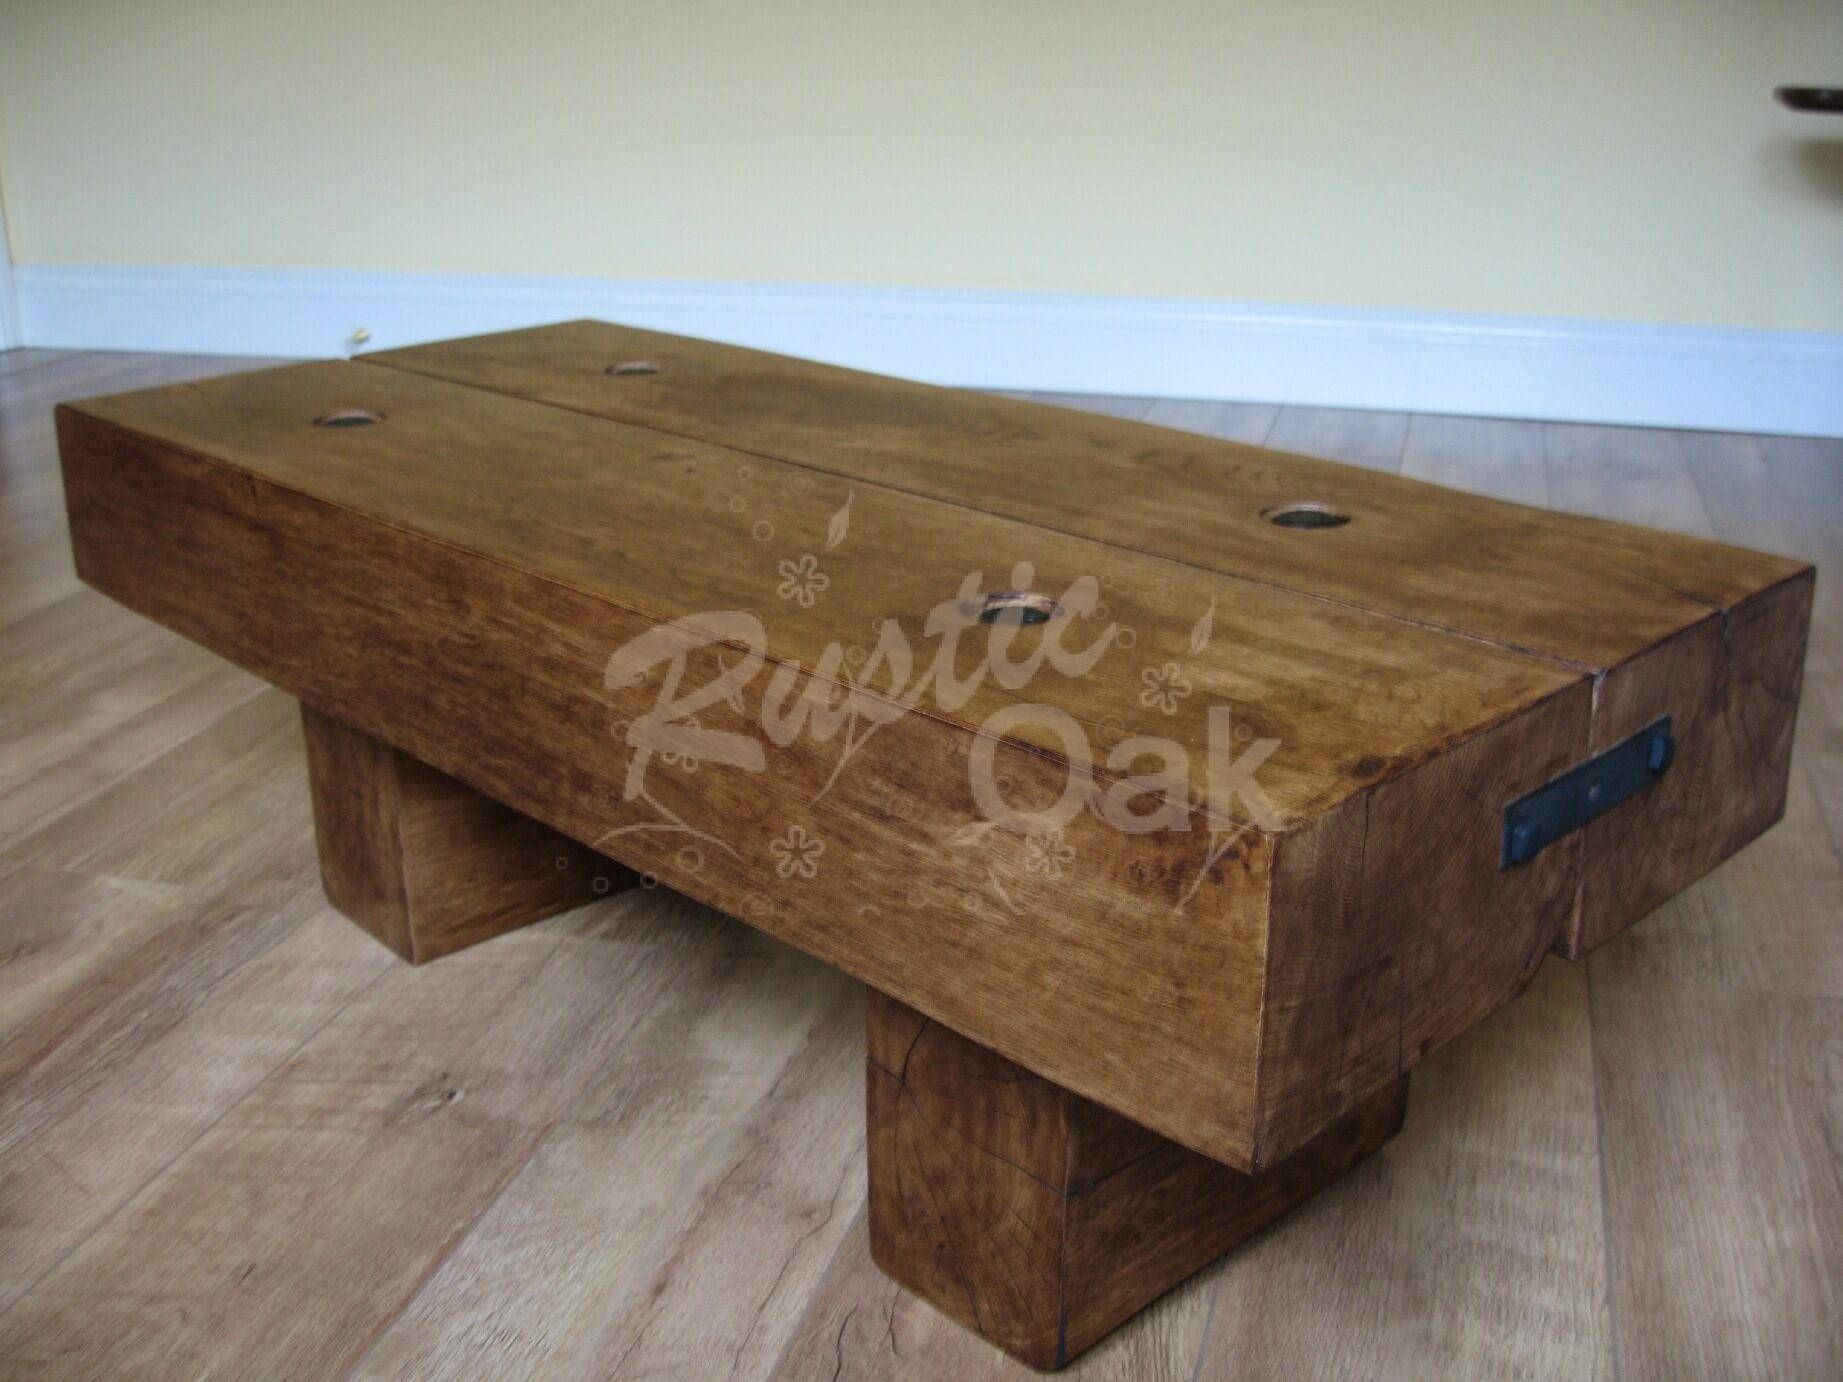 2 Beam Coffee Table With Rustic Bolts – Rustic Oak Regarding Rustic Oak Coffee Tables (View 4 of 15)